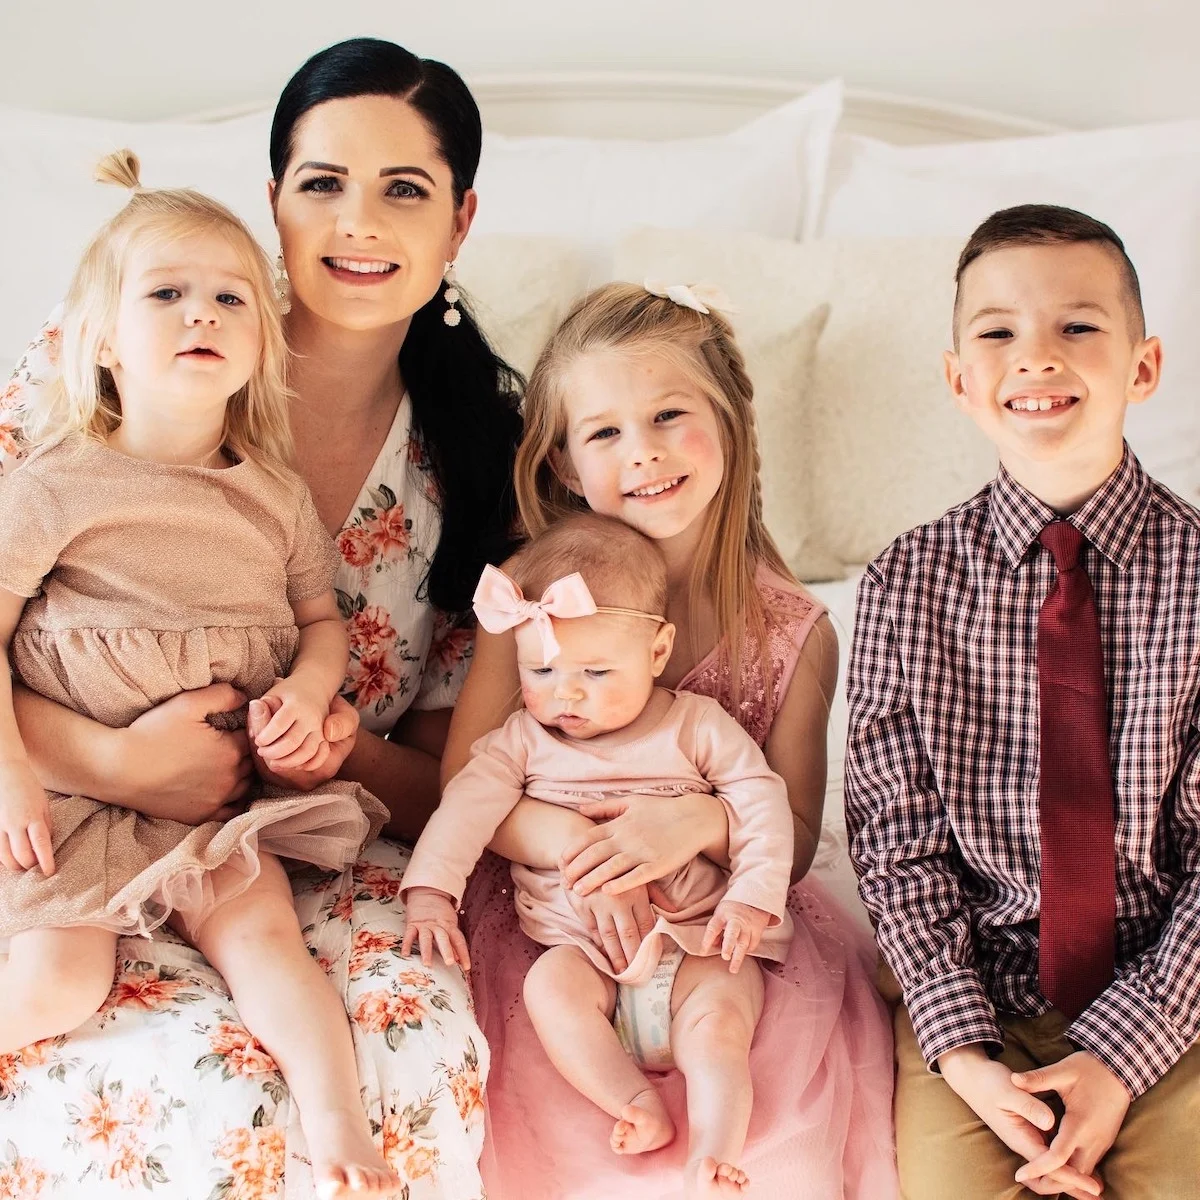 A mom poses with her children in coordinated outfits on a bed.